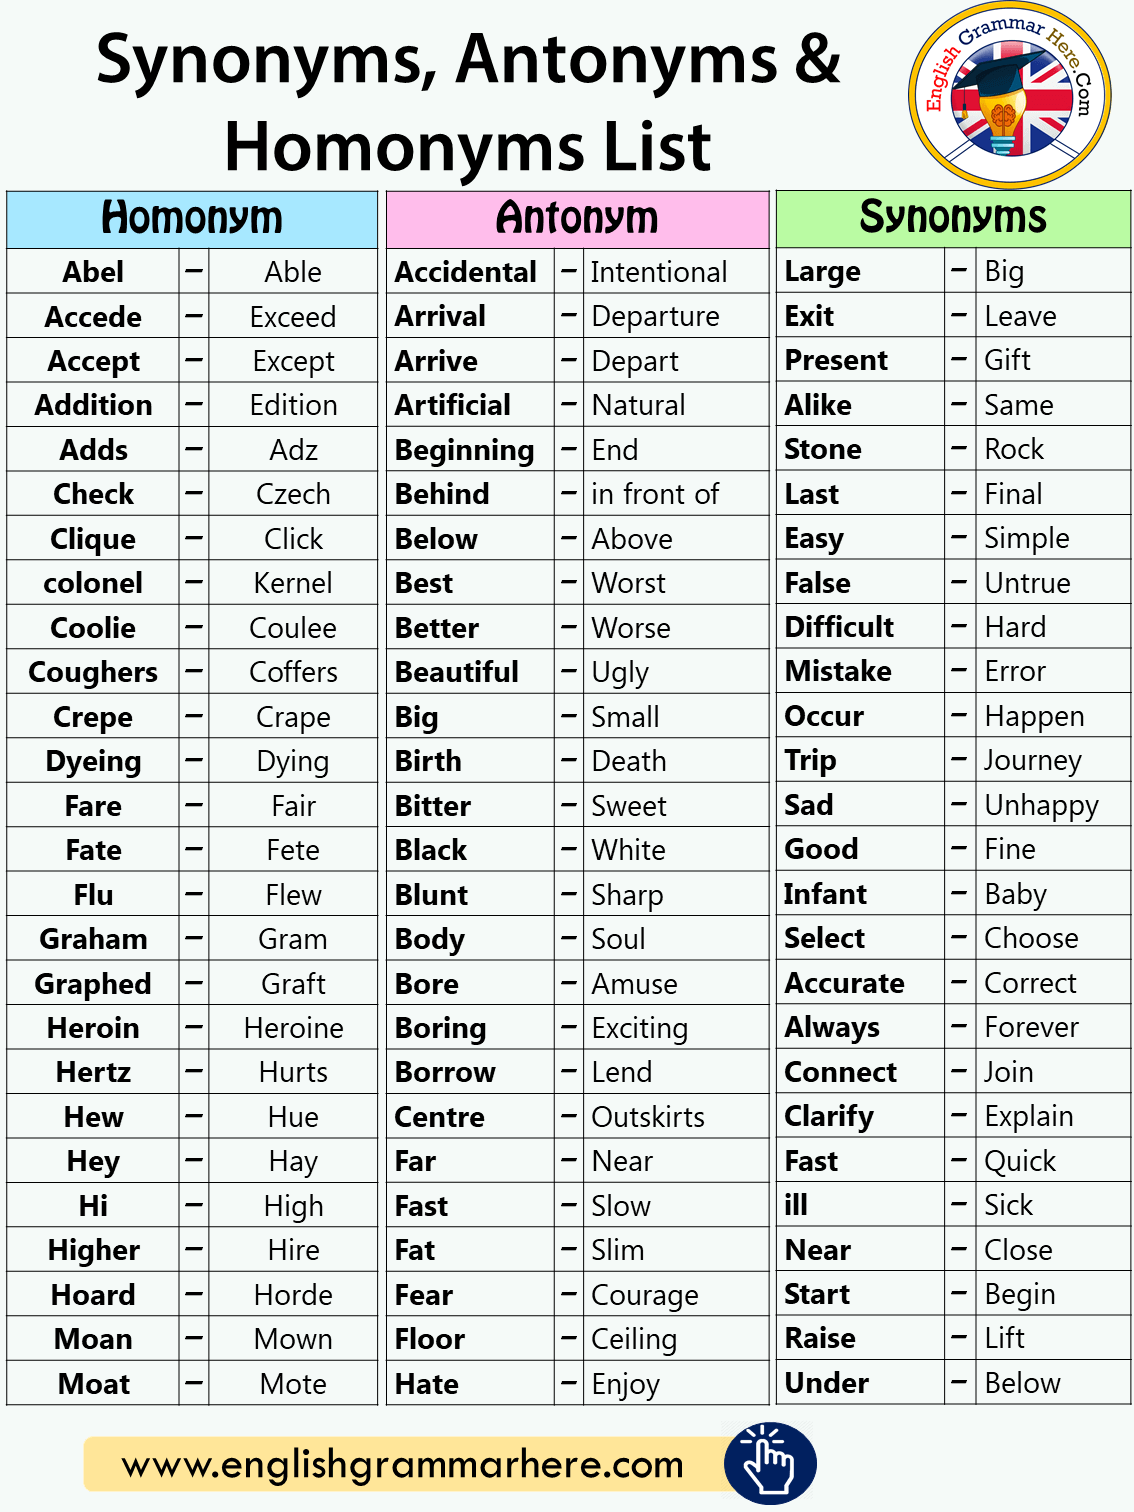 Synonyms Antonyms And Homonyms Words List In English English Grammar Here